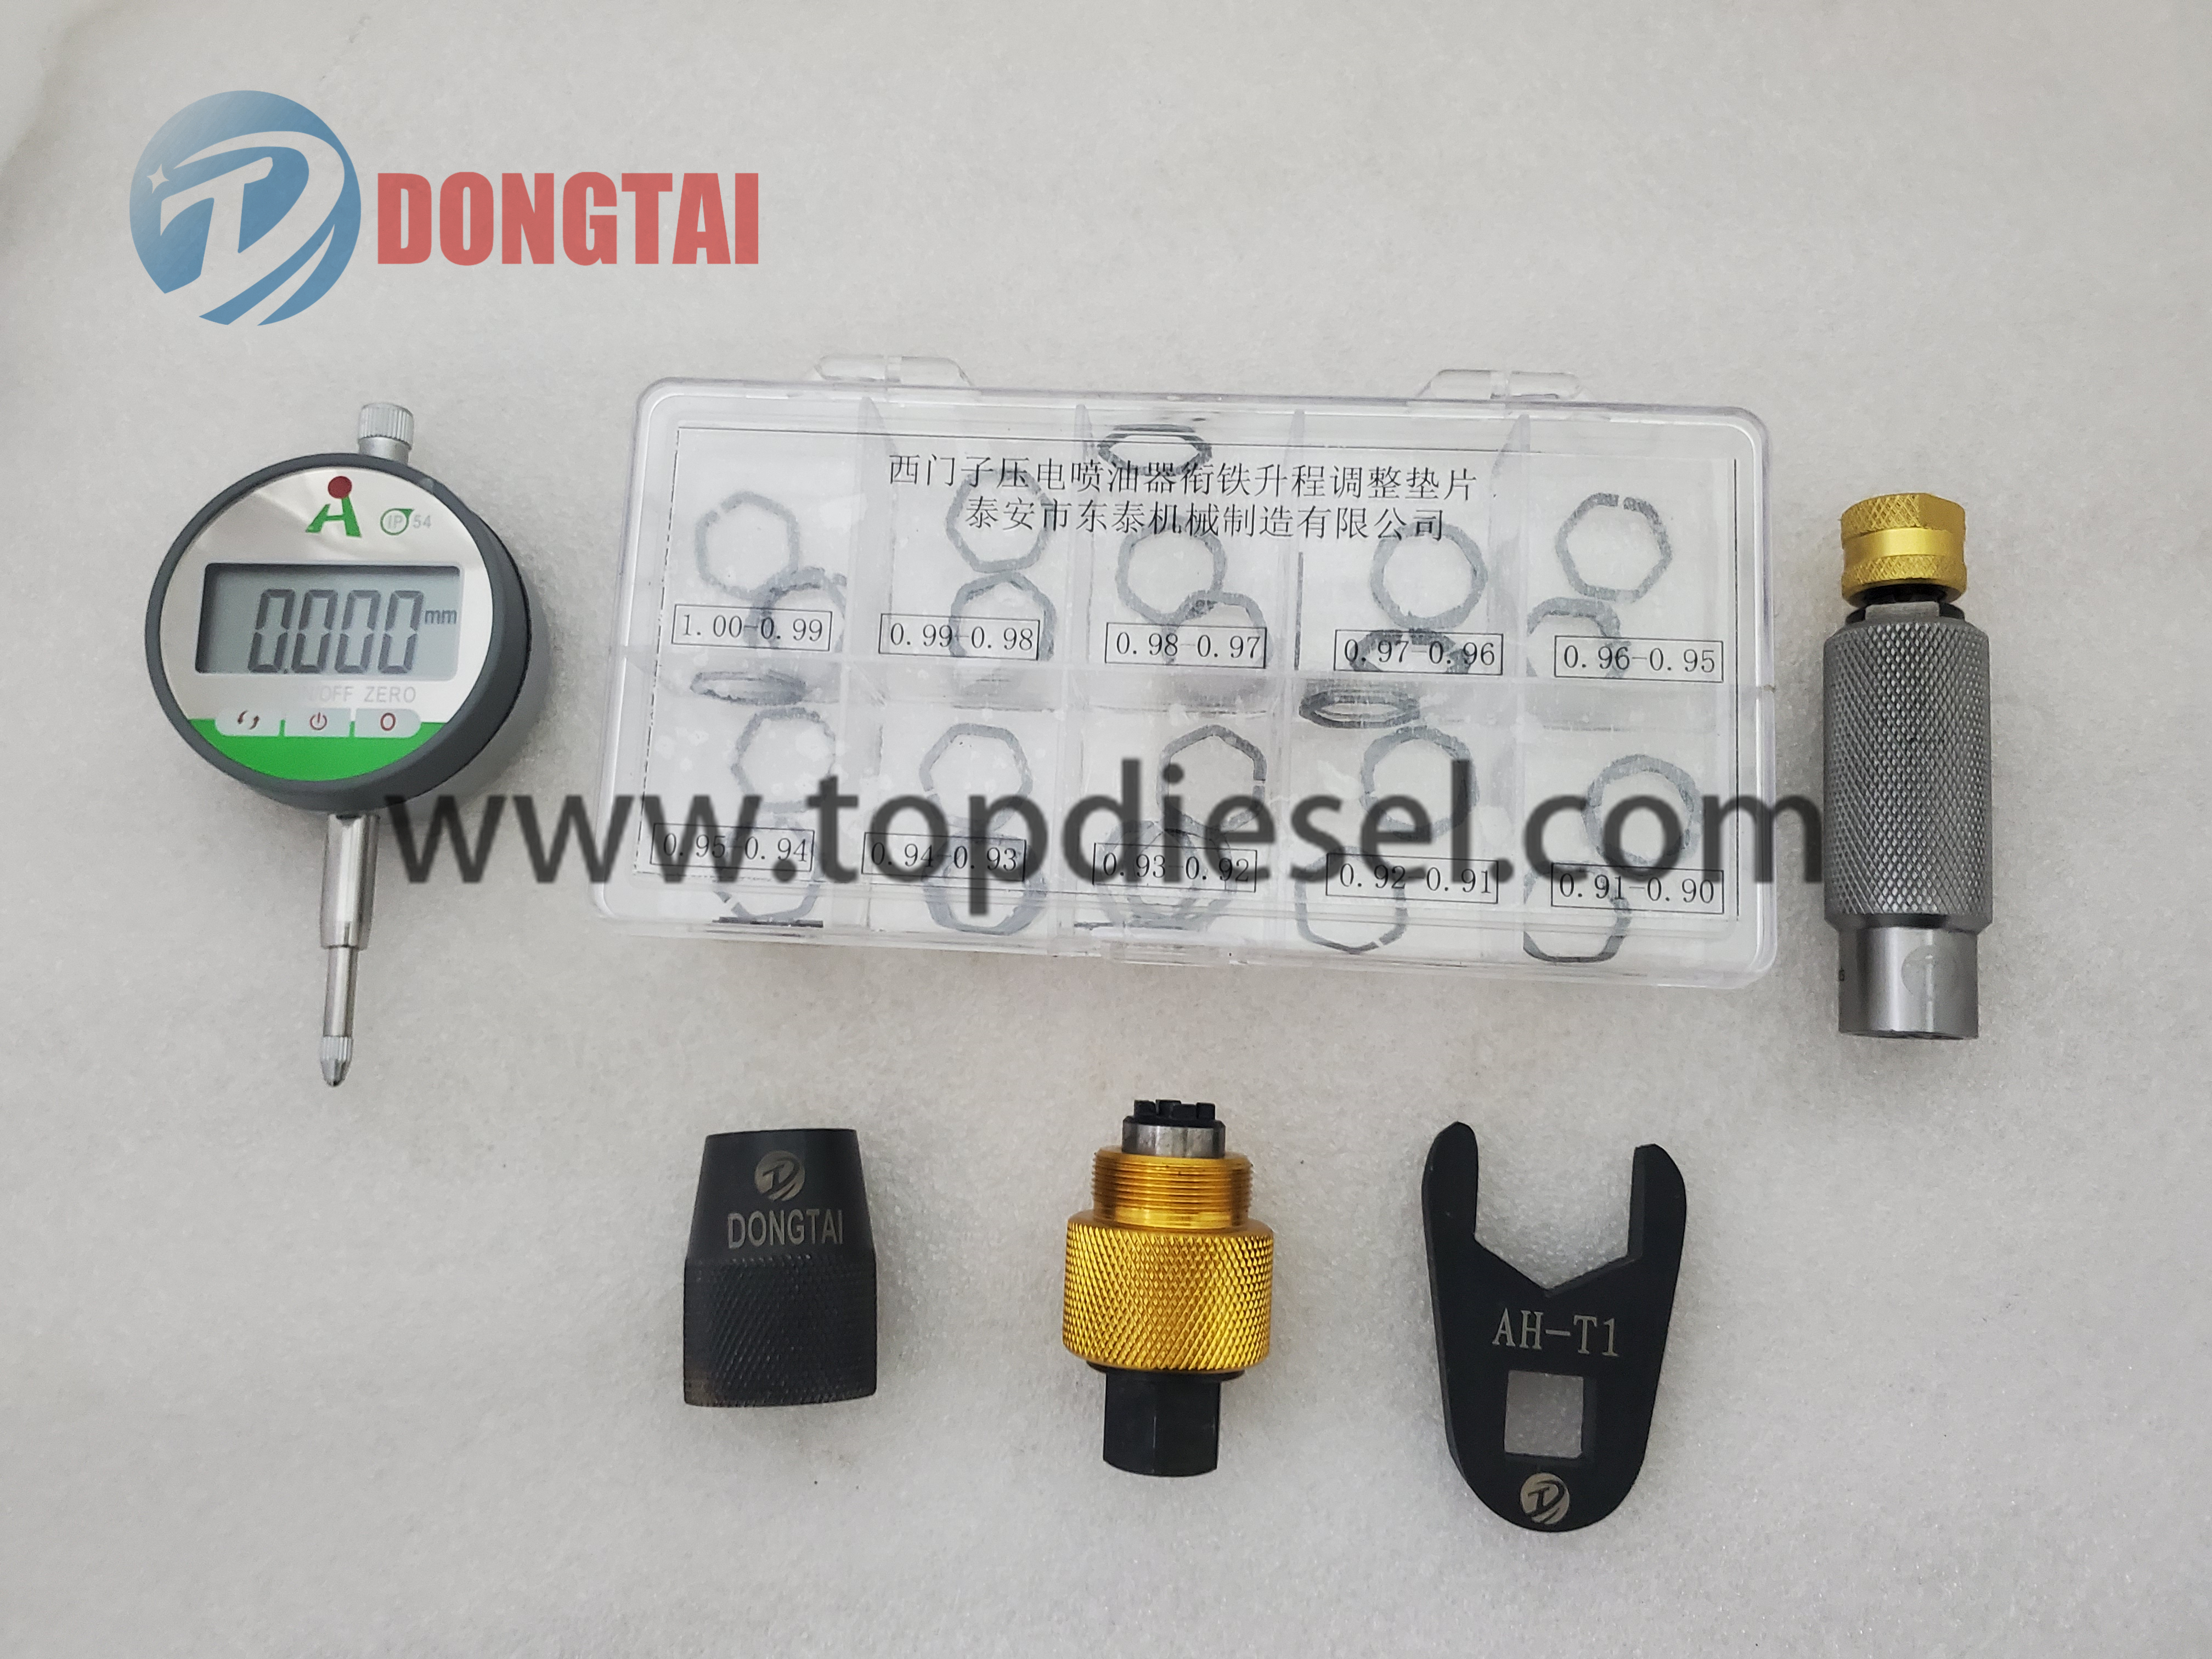 2017 New Style Common Rail Injector Demolition Truck Tools - NO.037(4) SIEMENS Injectors Tools And Shims – Dongtai